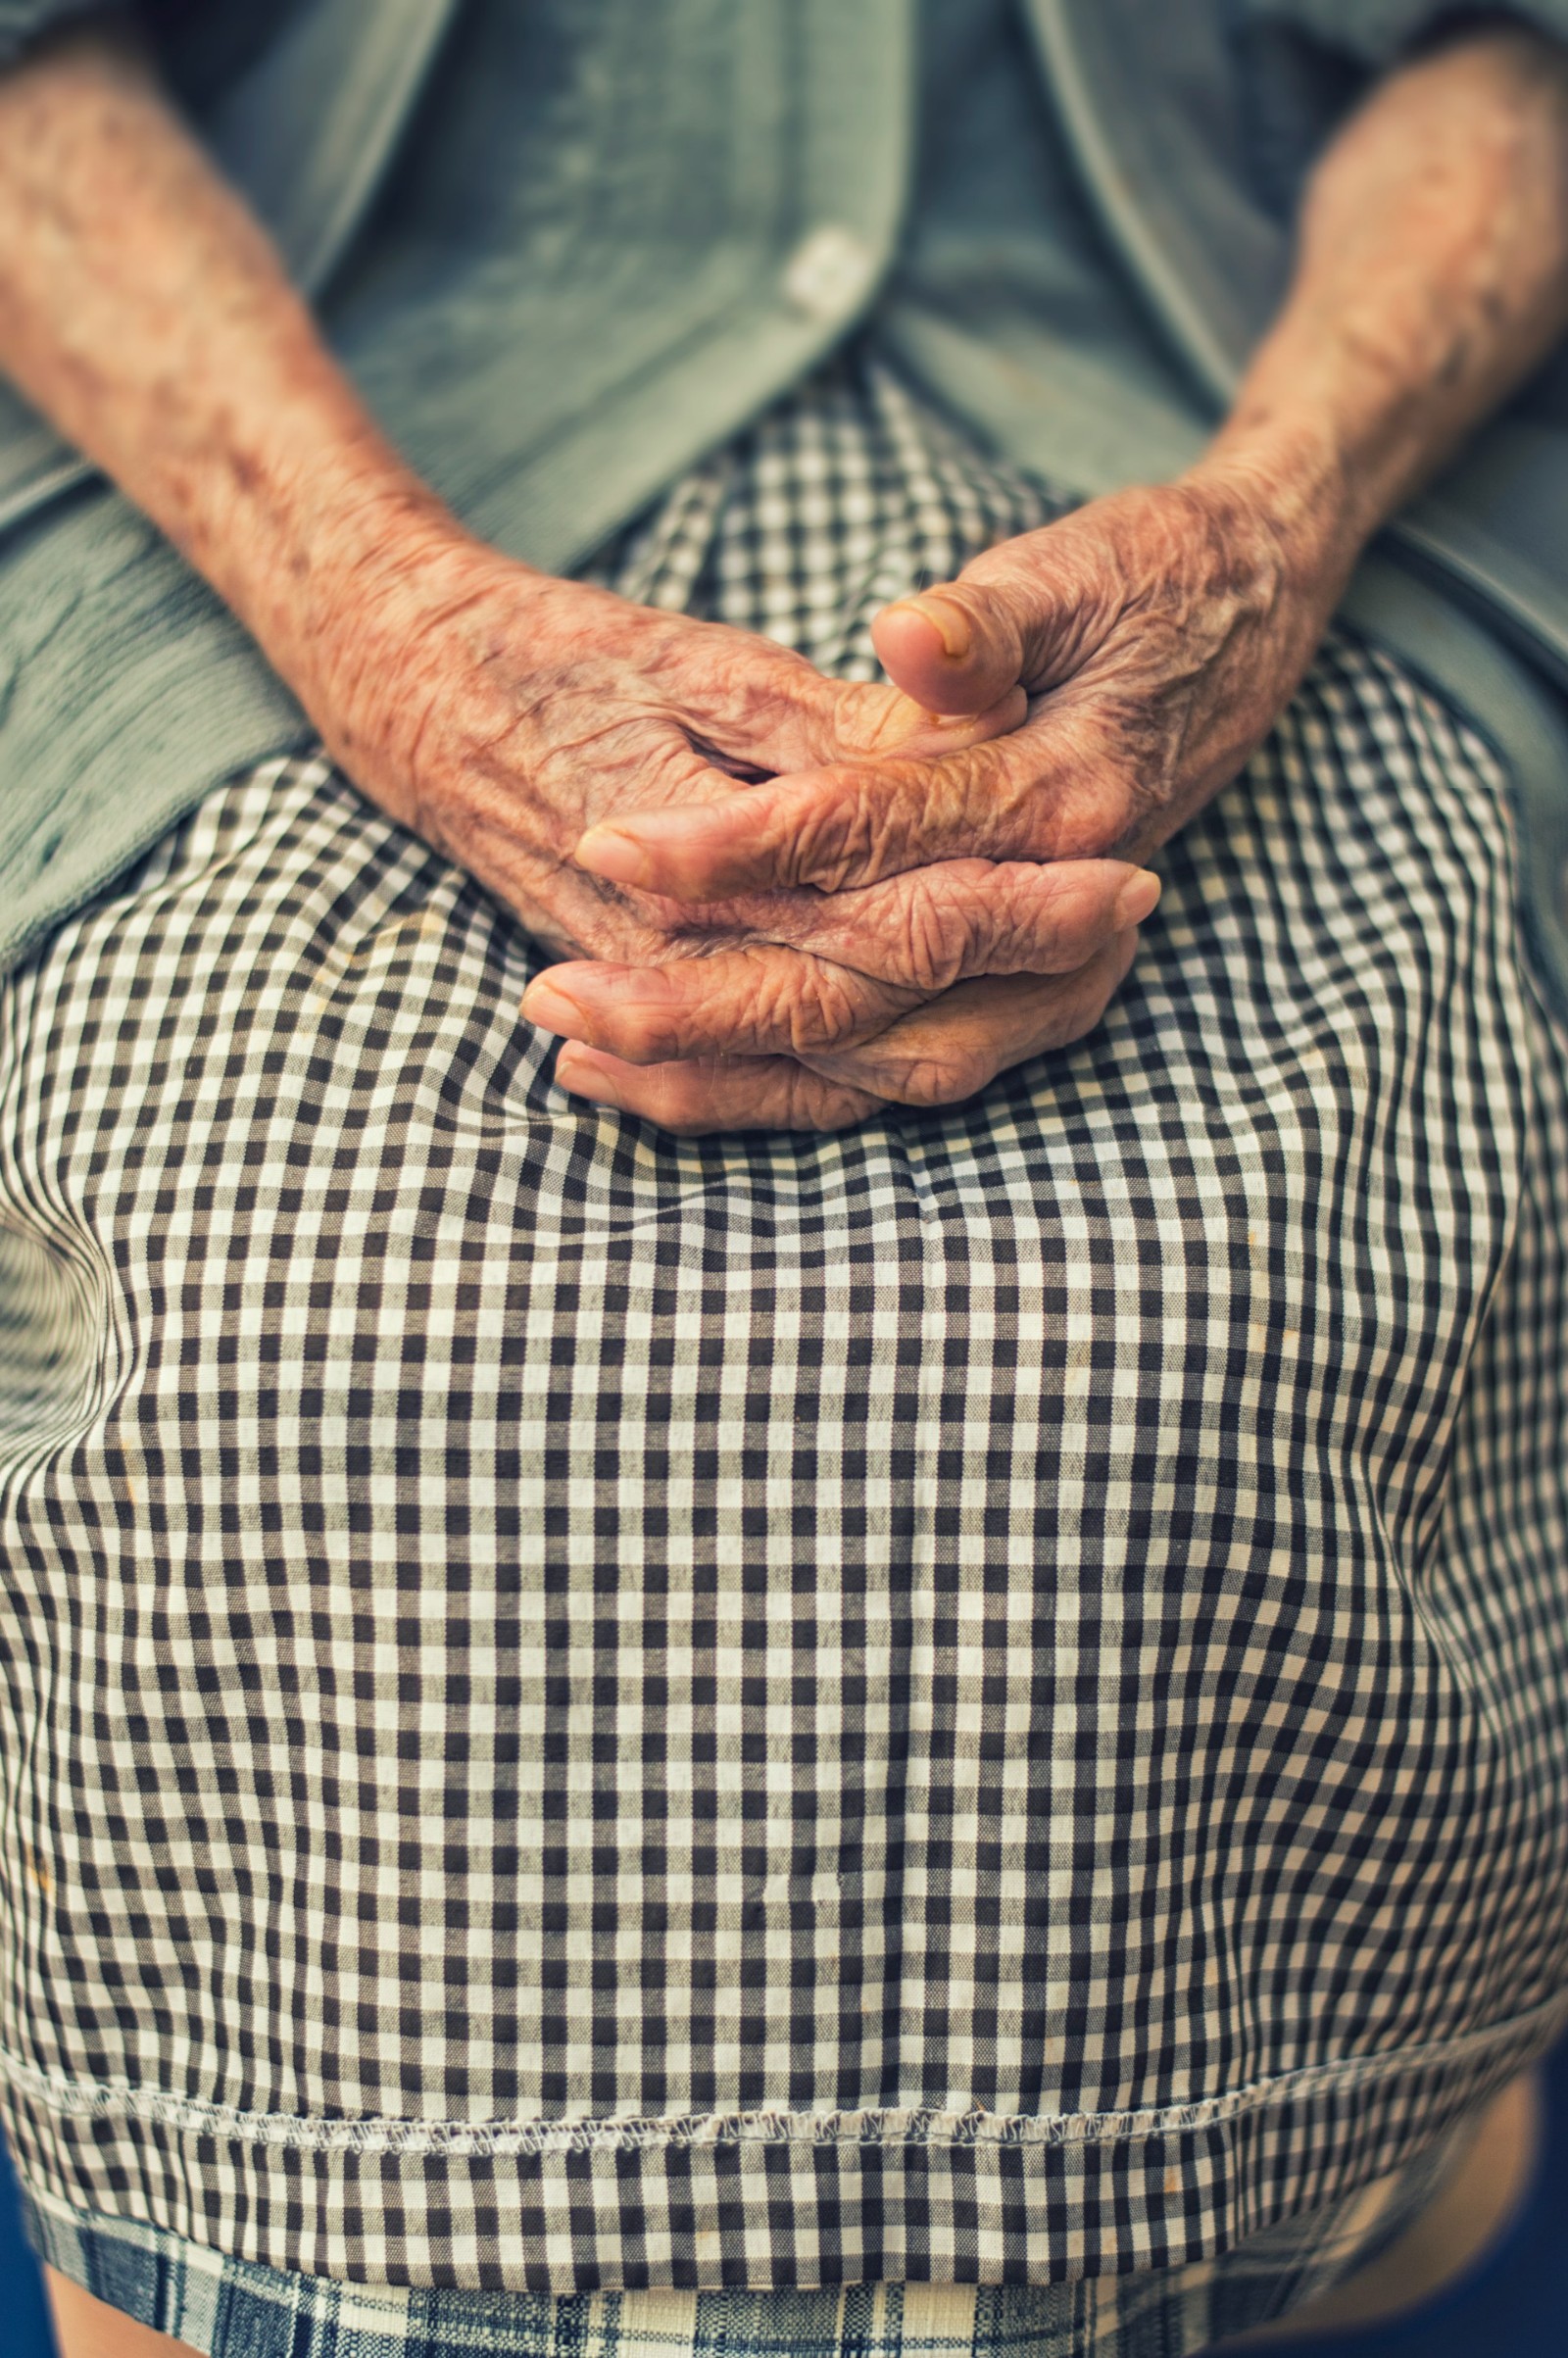 An image of an elderly woman with her hands touching.